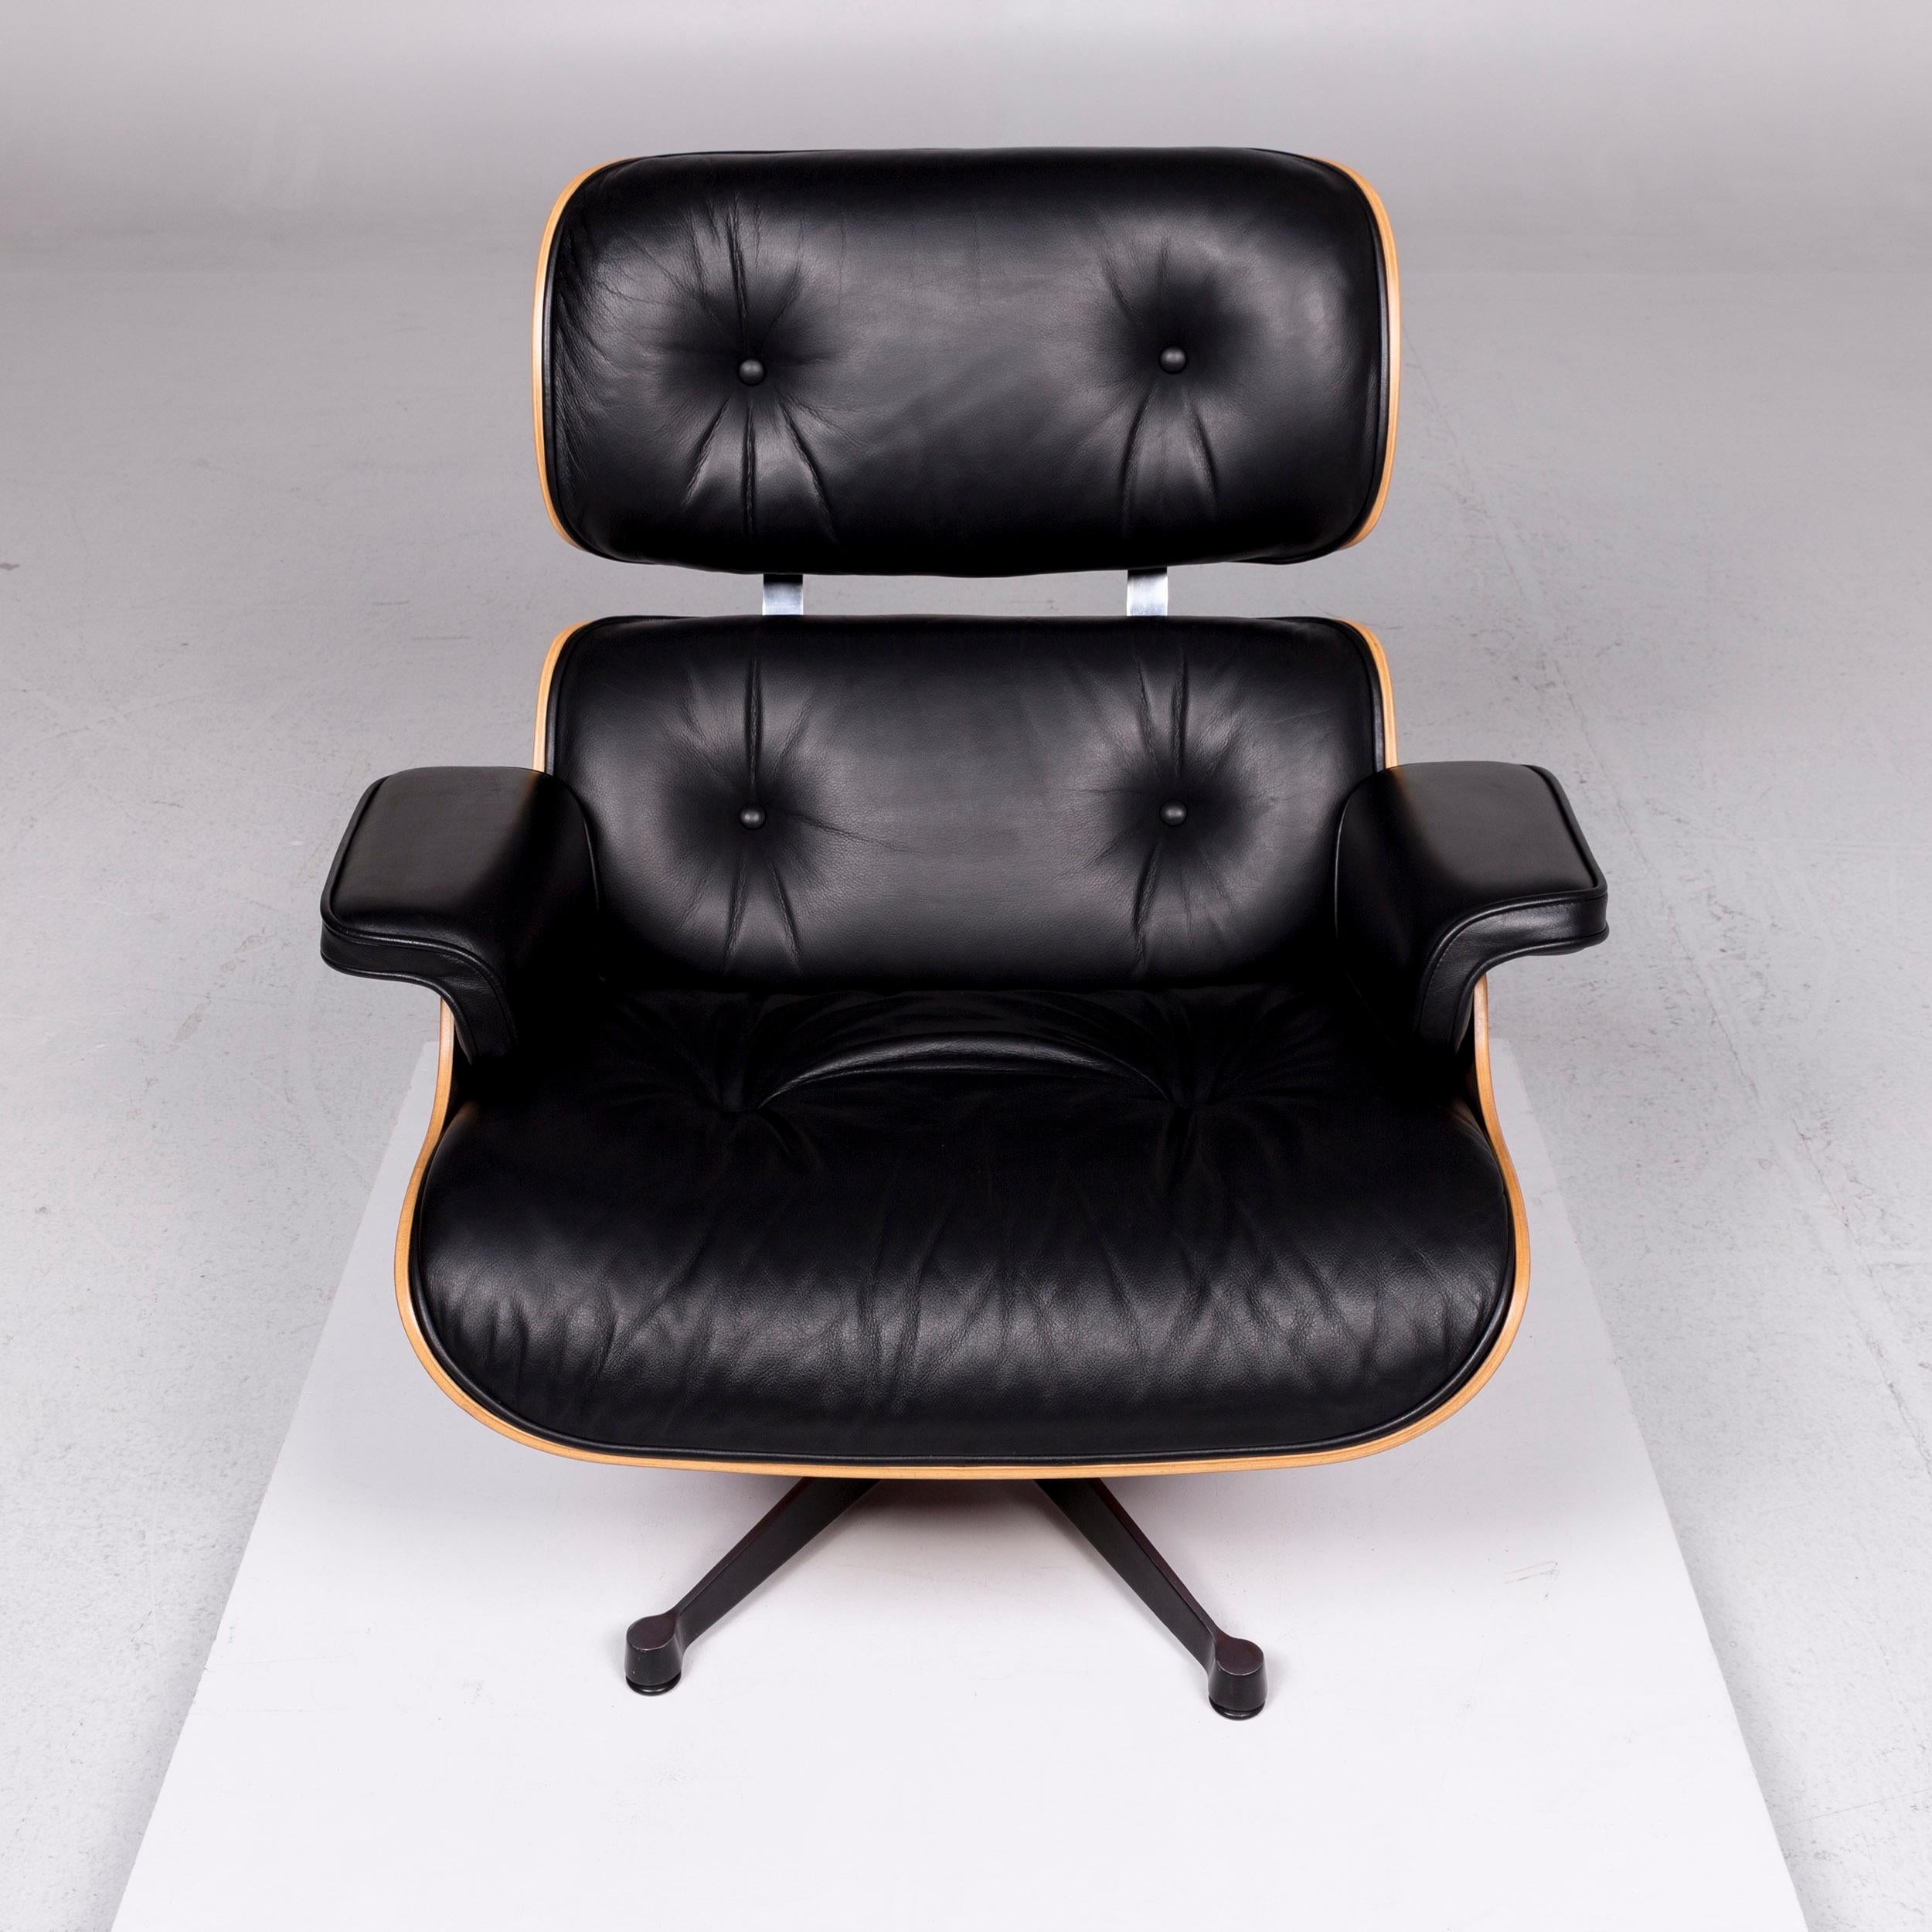 Modern Vitra Eames Lounge Chair Leather Armchair Black Charles & Ray Eames Club Chair For Sale